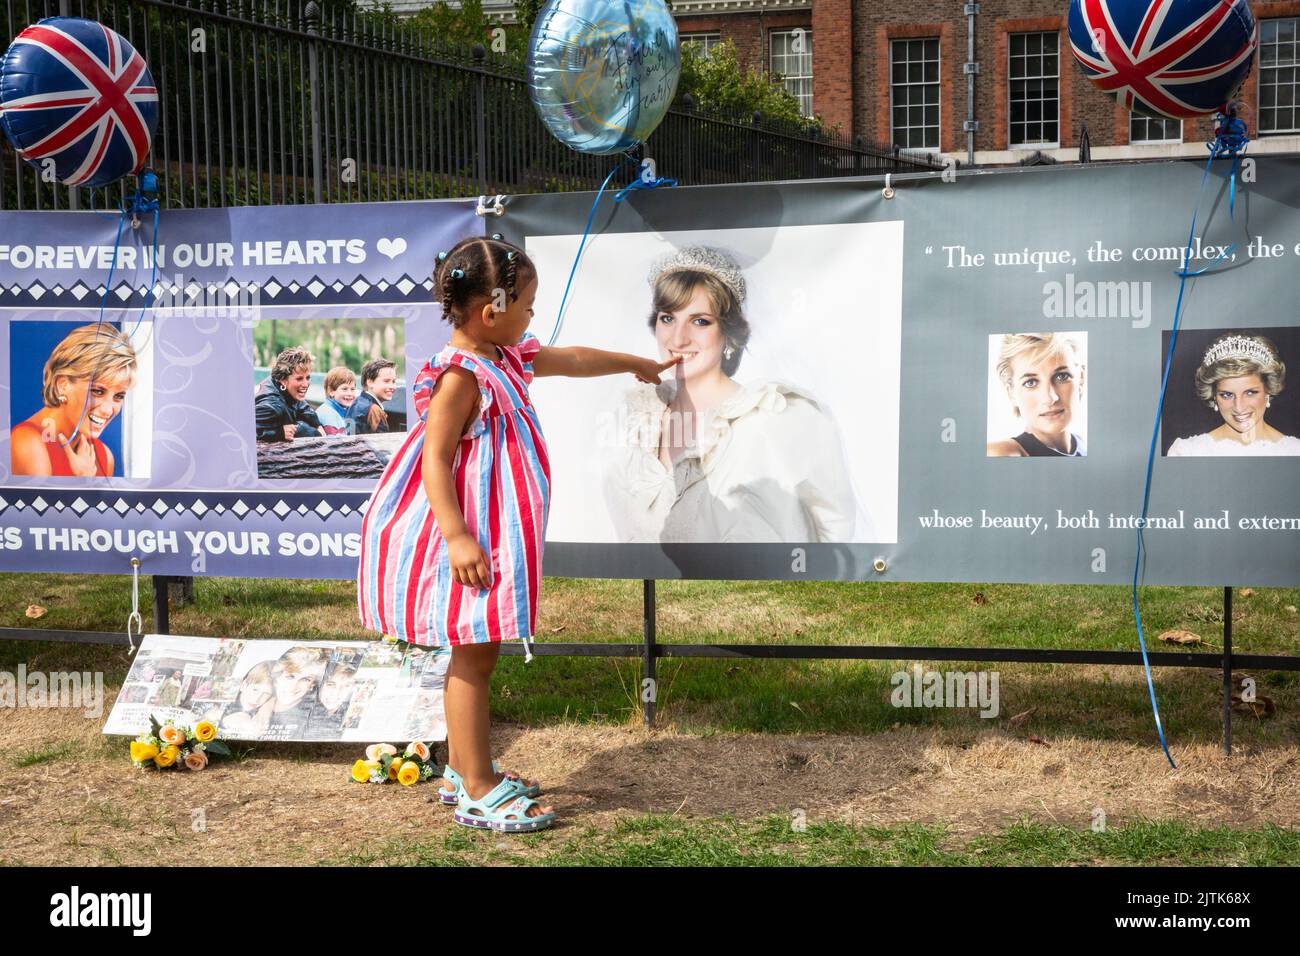 London, UK. 31st Aug, 2022. Amira, 3yrs old, is here with her family to remember Diana. Royal fans and visitors gather at the gates to Kensington Palace to commemorate the 25th anniversary of th tragic death of Diana Princess of Wales. Credit: Imageplotter/Alamy Live News Stock Photo